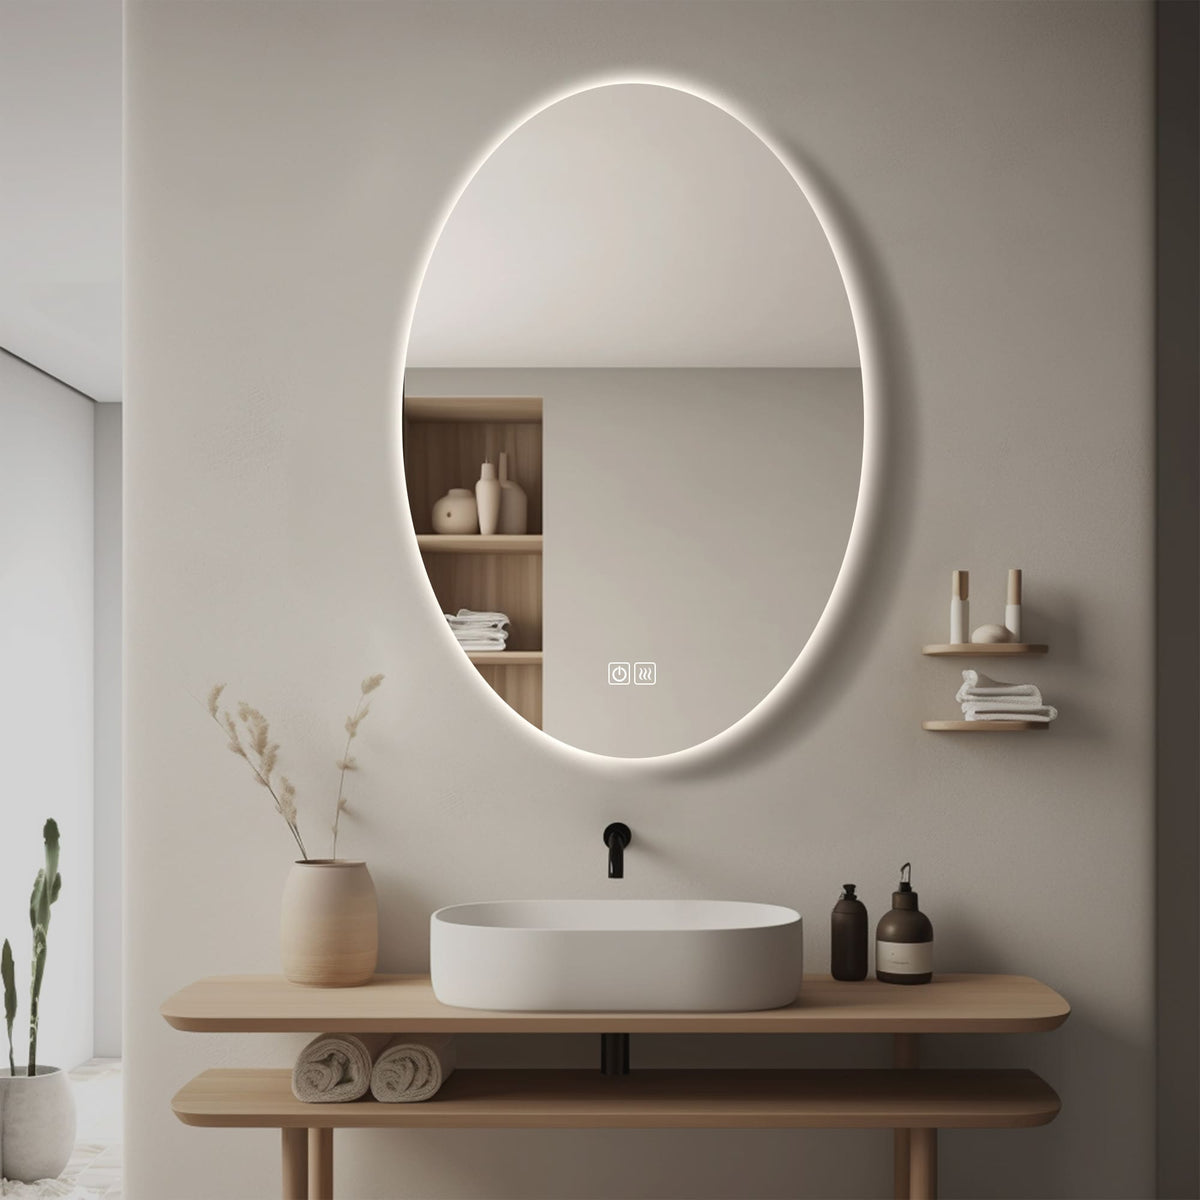 Customized LED Mirrors for Your Home and Bathroom - Inyouths